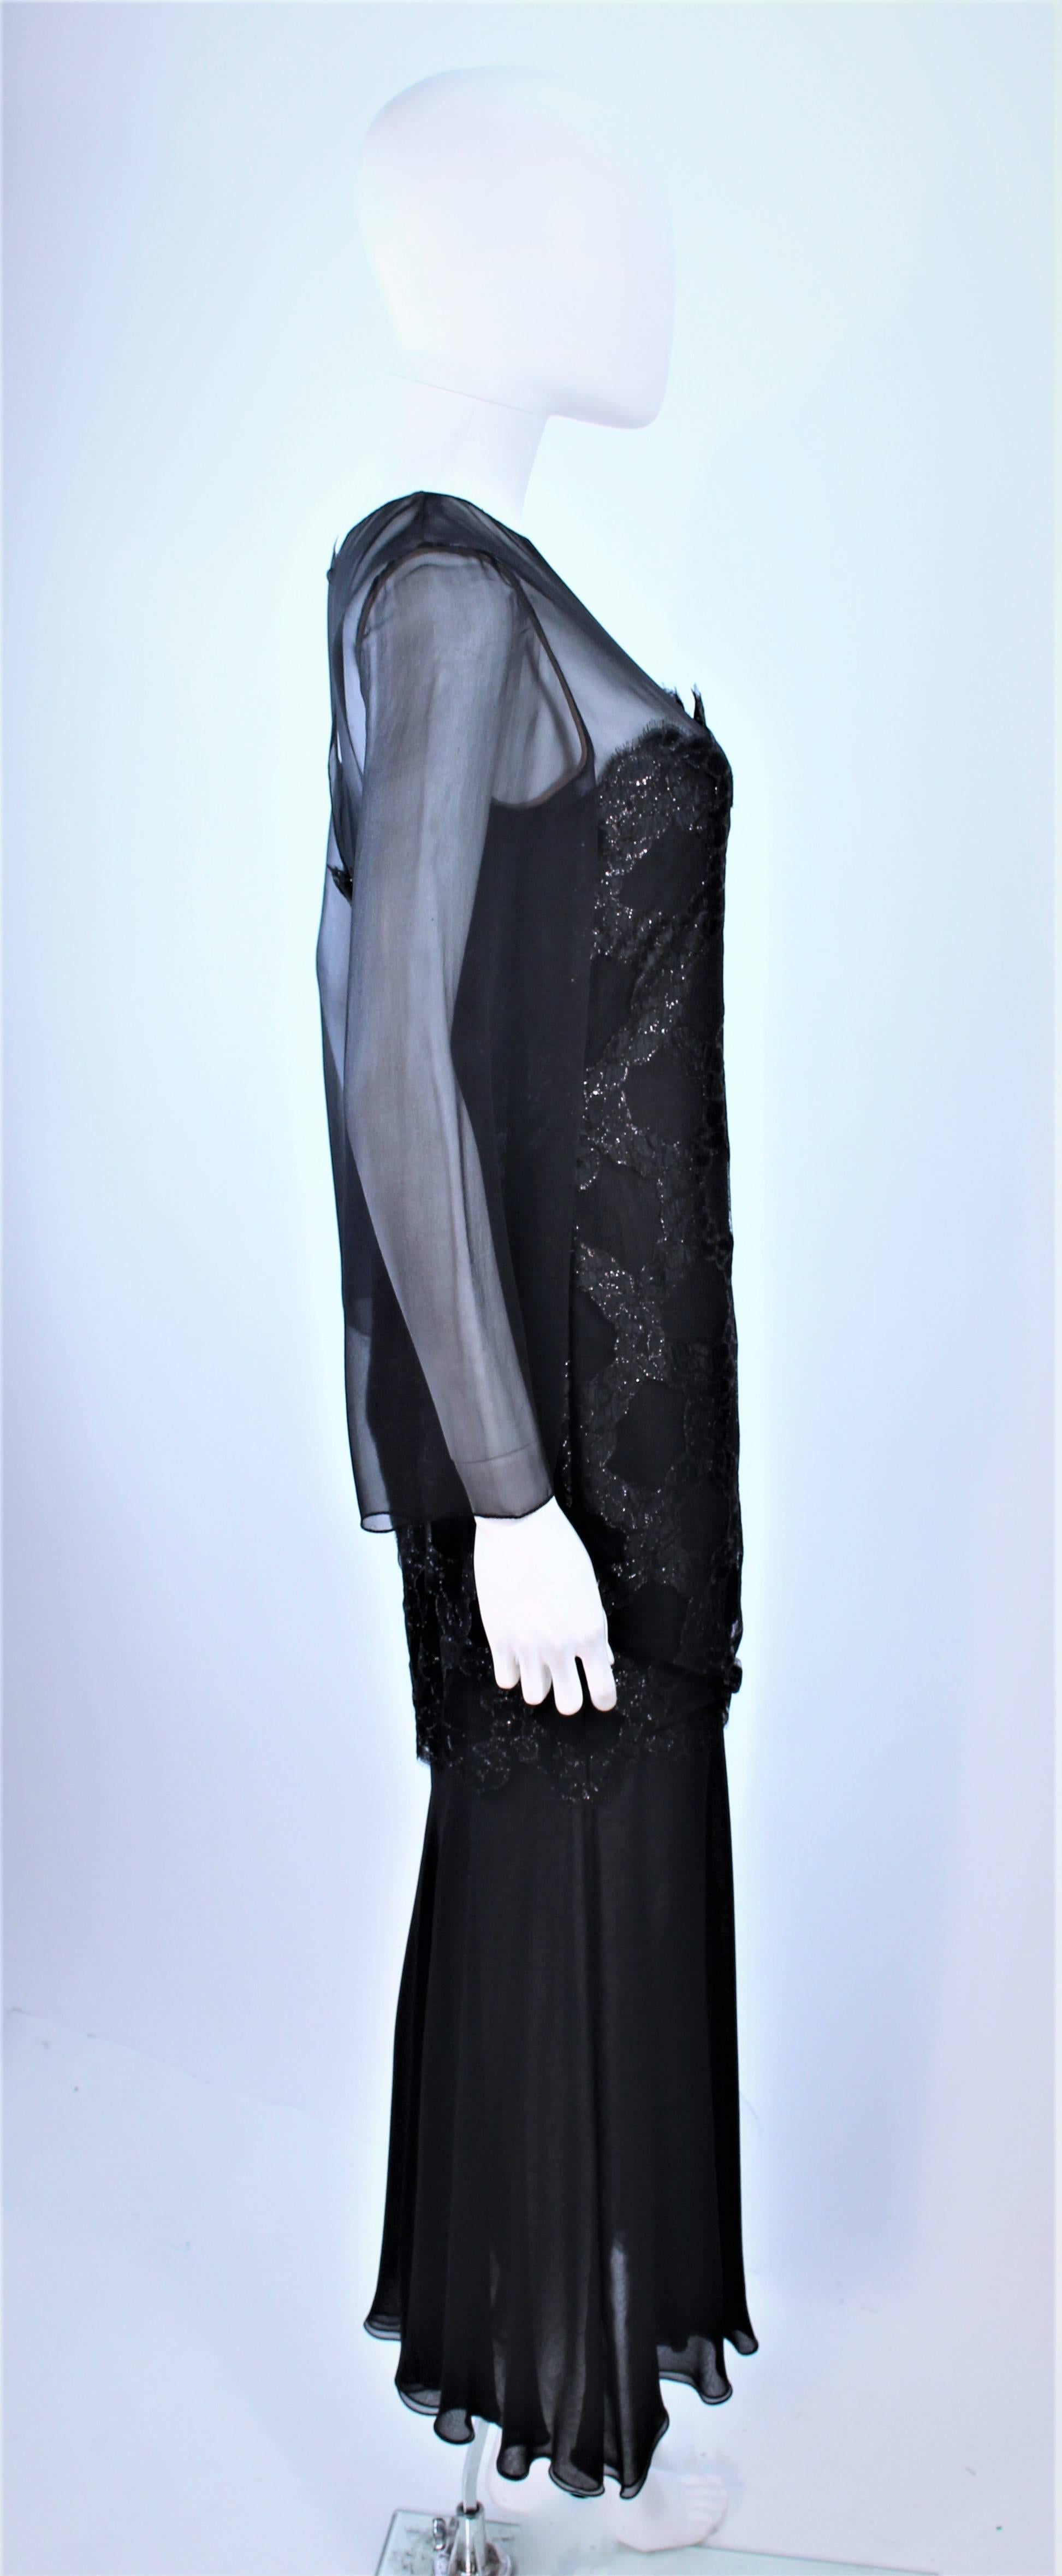 BILL BLASS Black Chiffon Gown with Gold Lame Bodice Size 12 For Sale 3